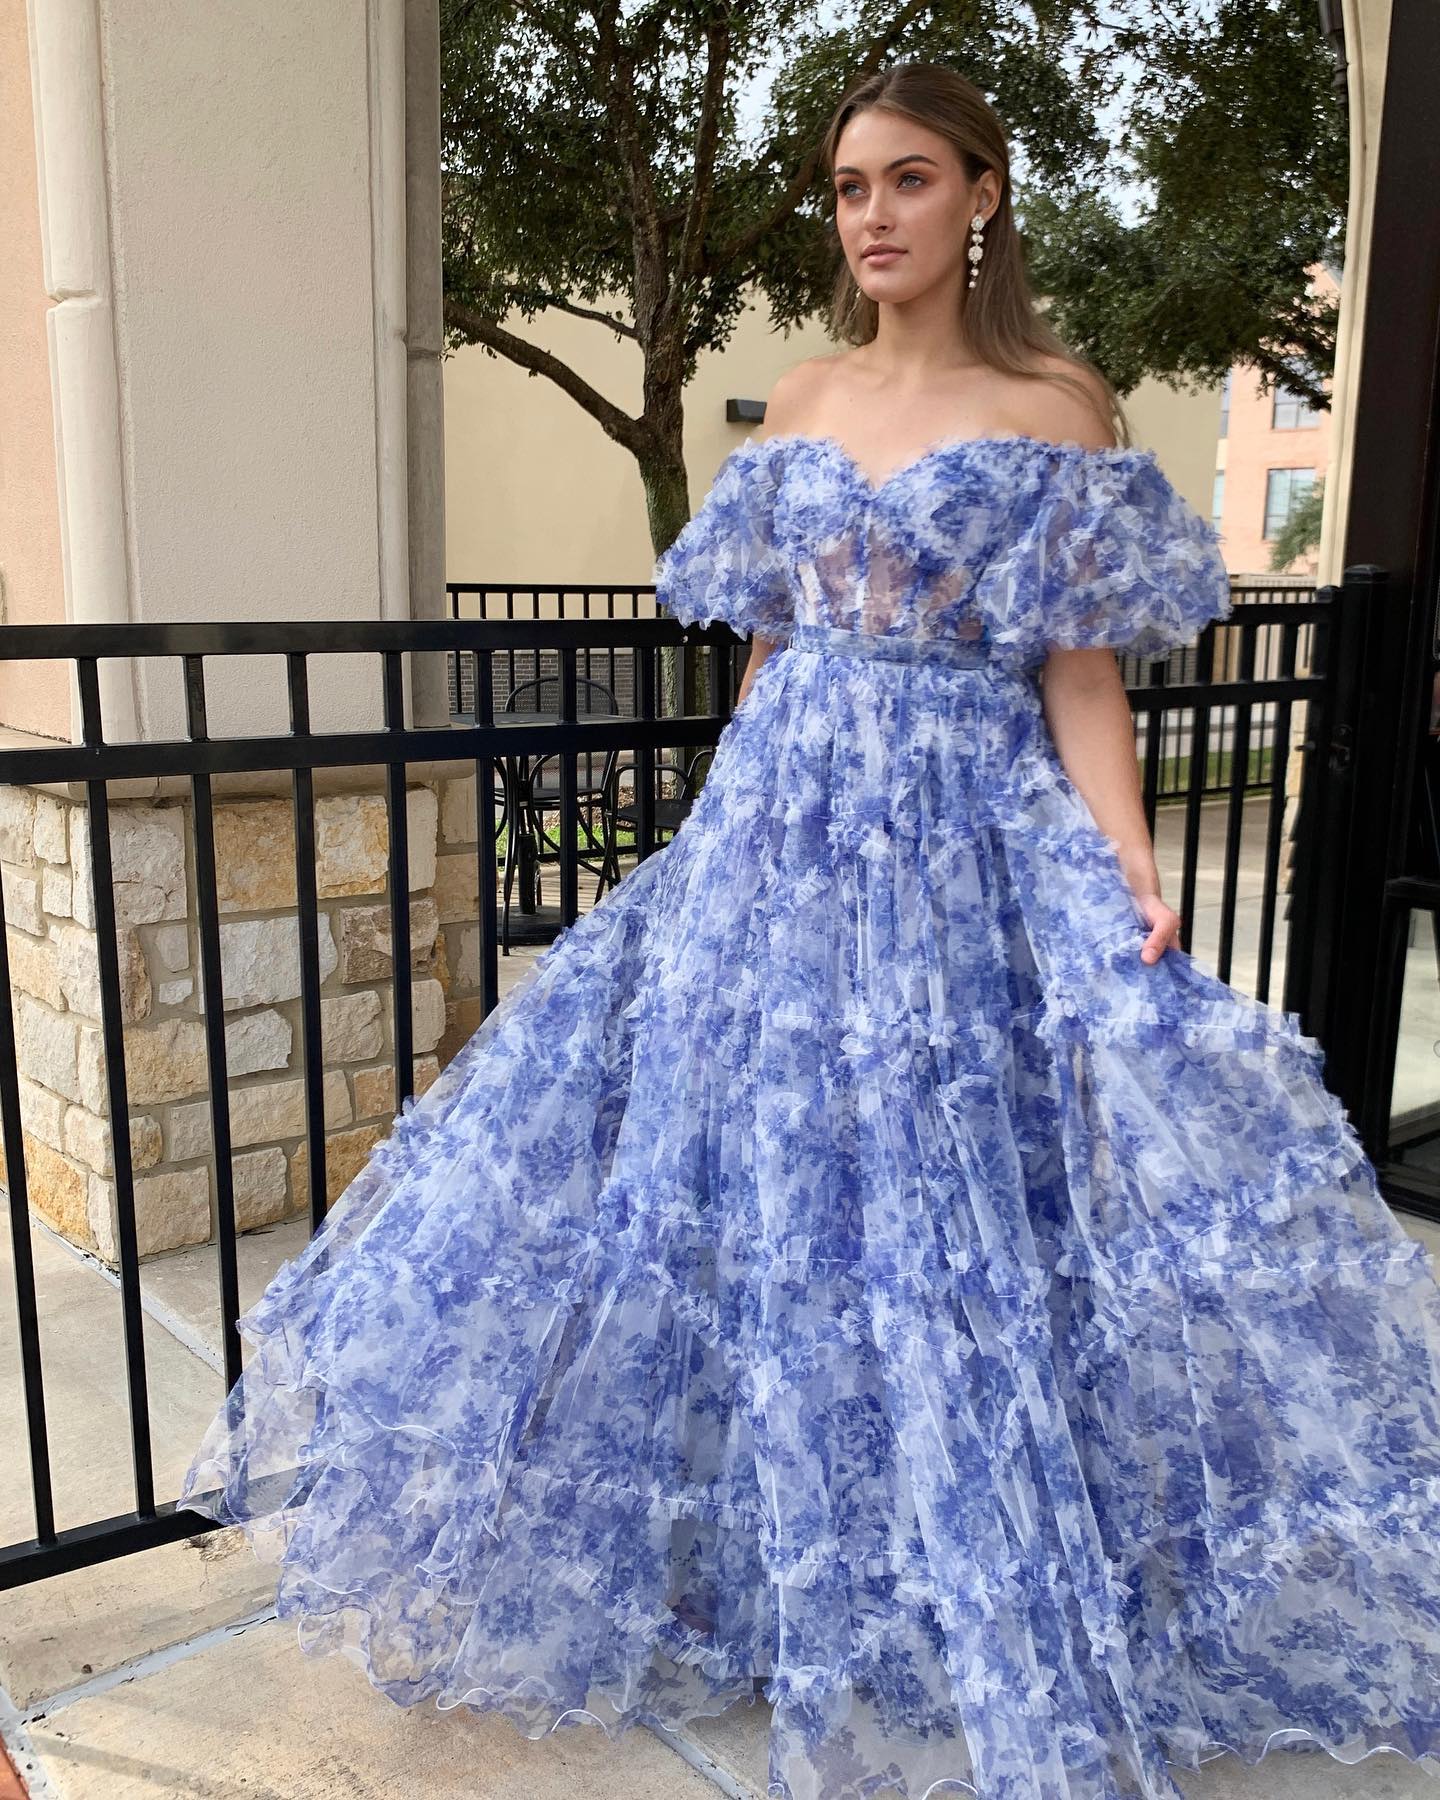 Mackenzie | Off the Shoulder Blue Floral Print Ruffled Tulle Prom Dress